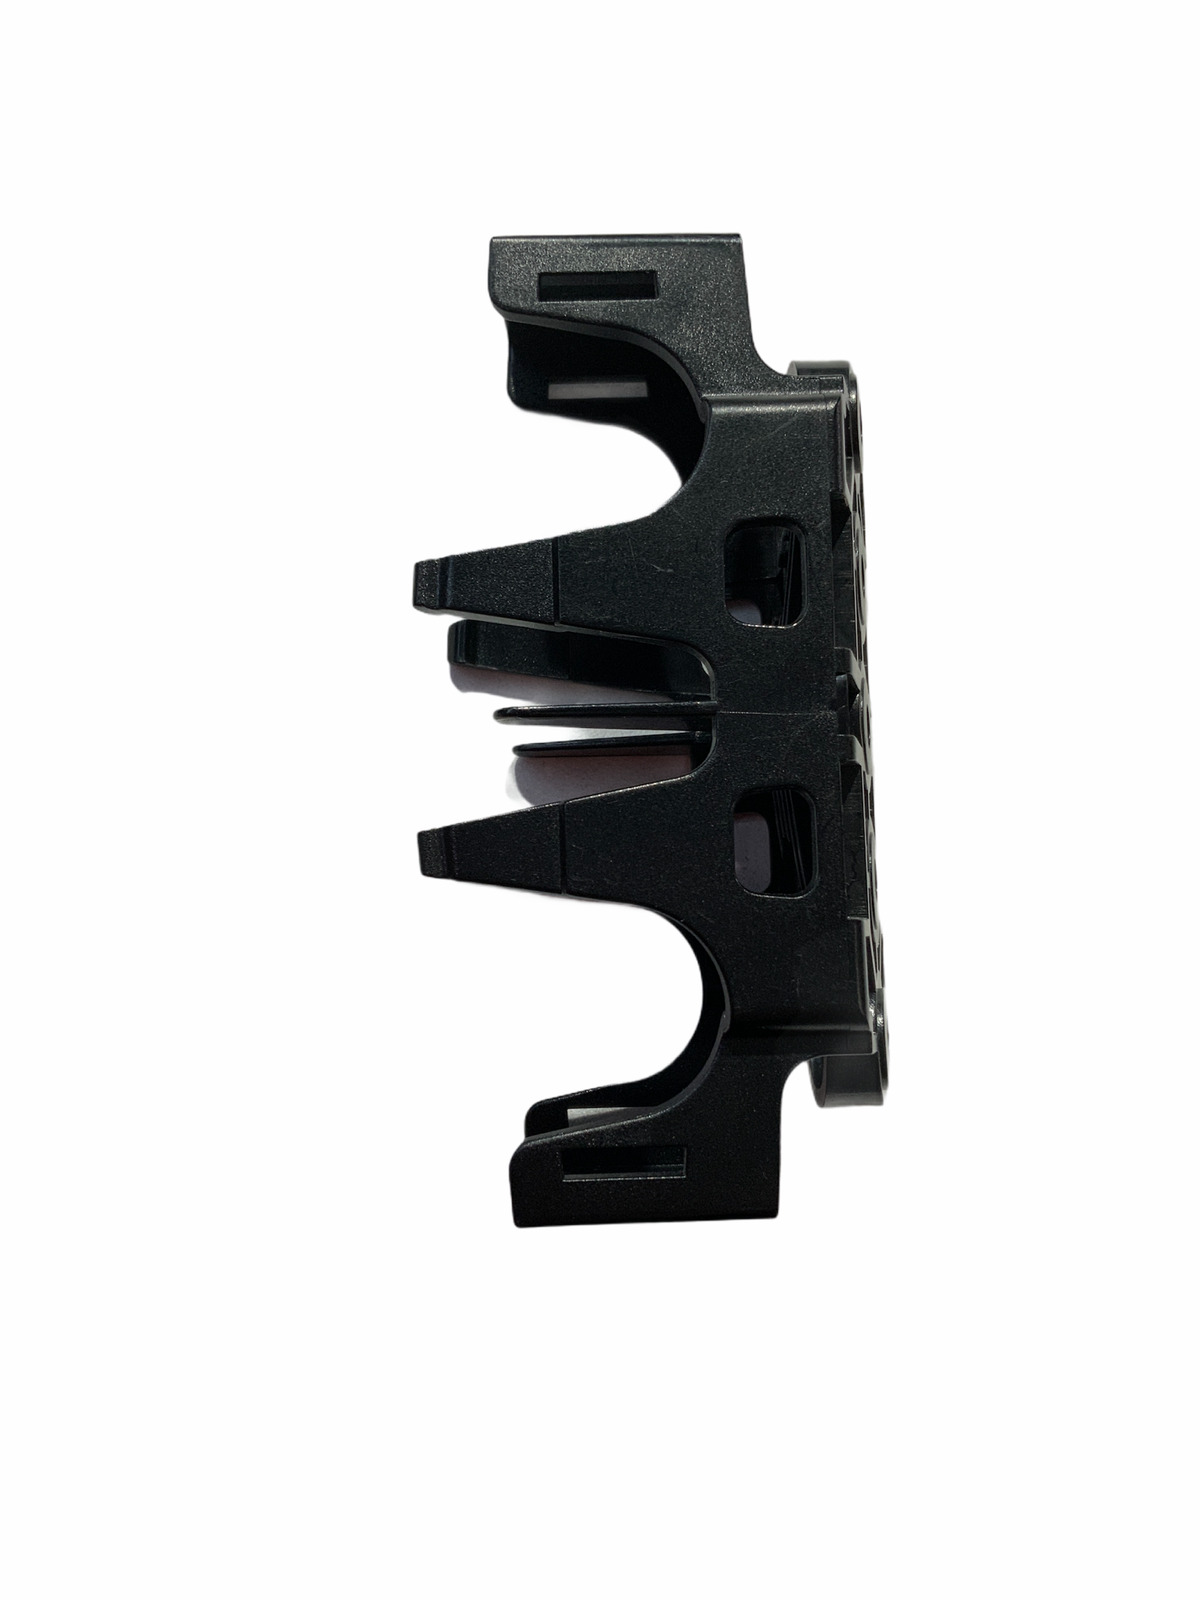 X26 Exoskeleton Taser Holster Twin Cartridge Adaptor Attachment - No fixings